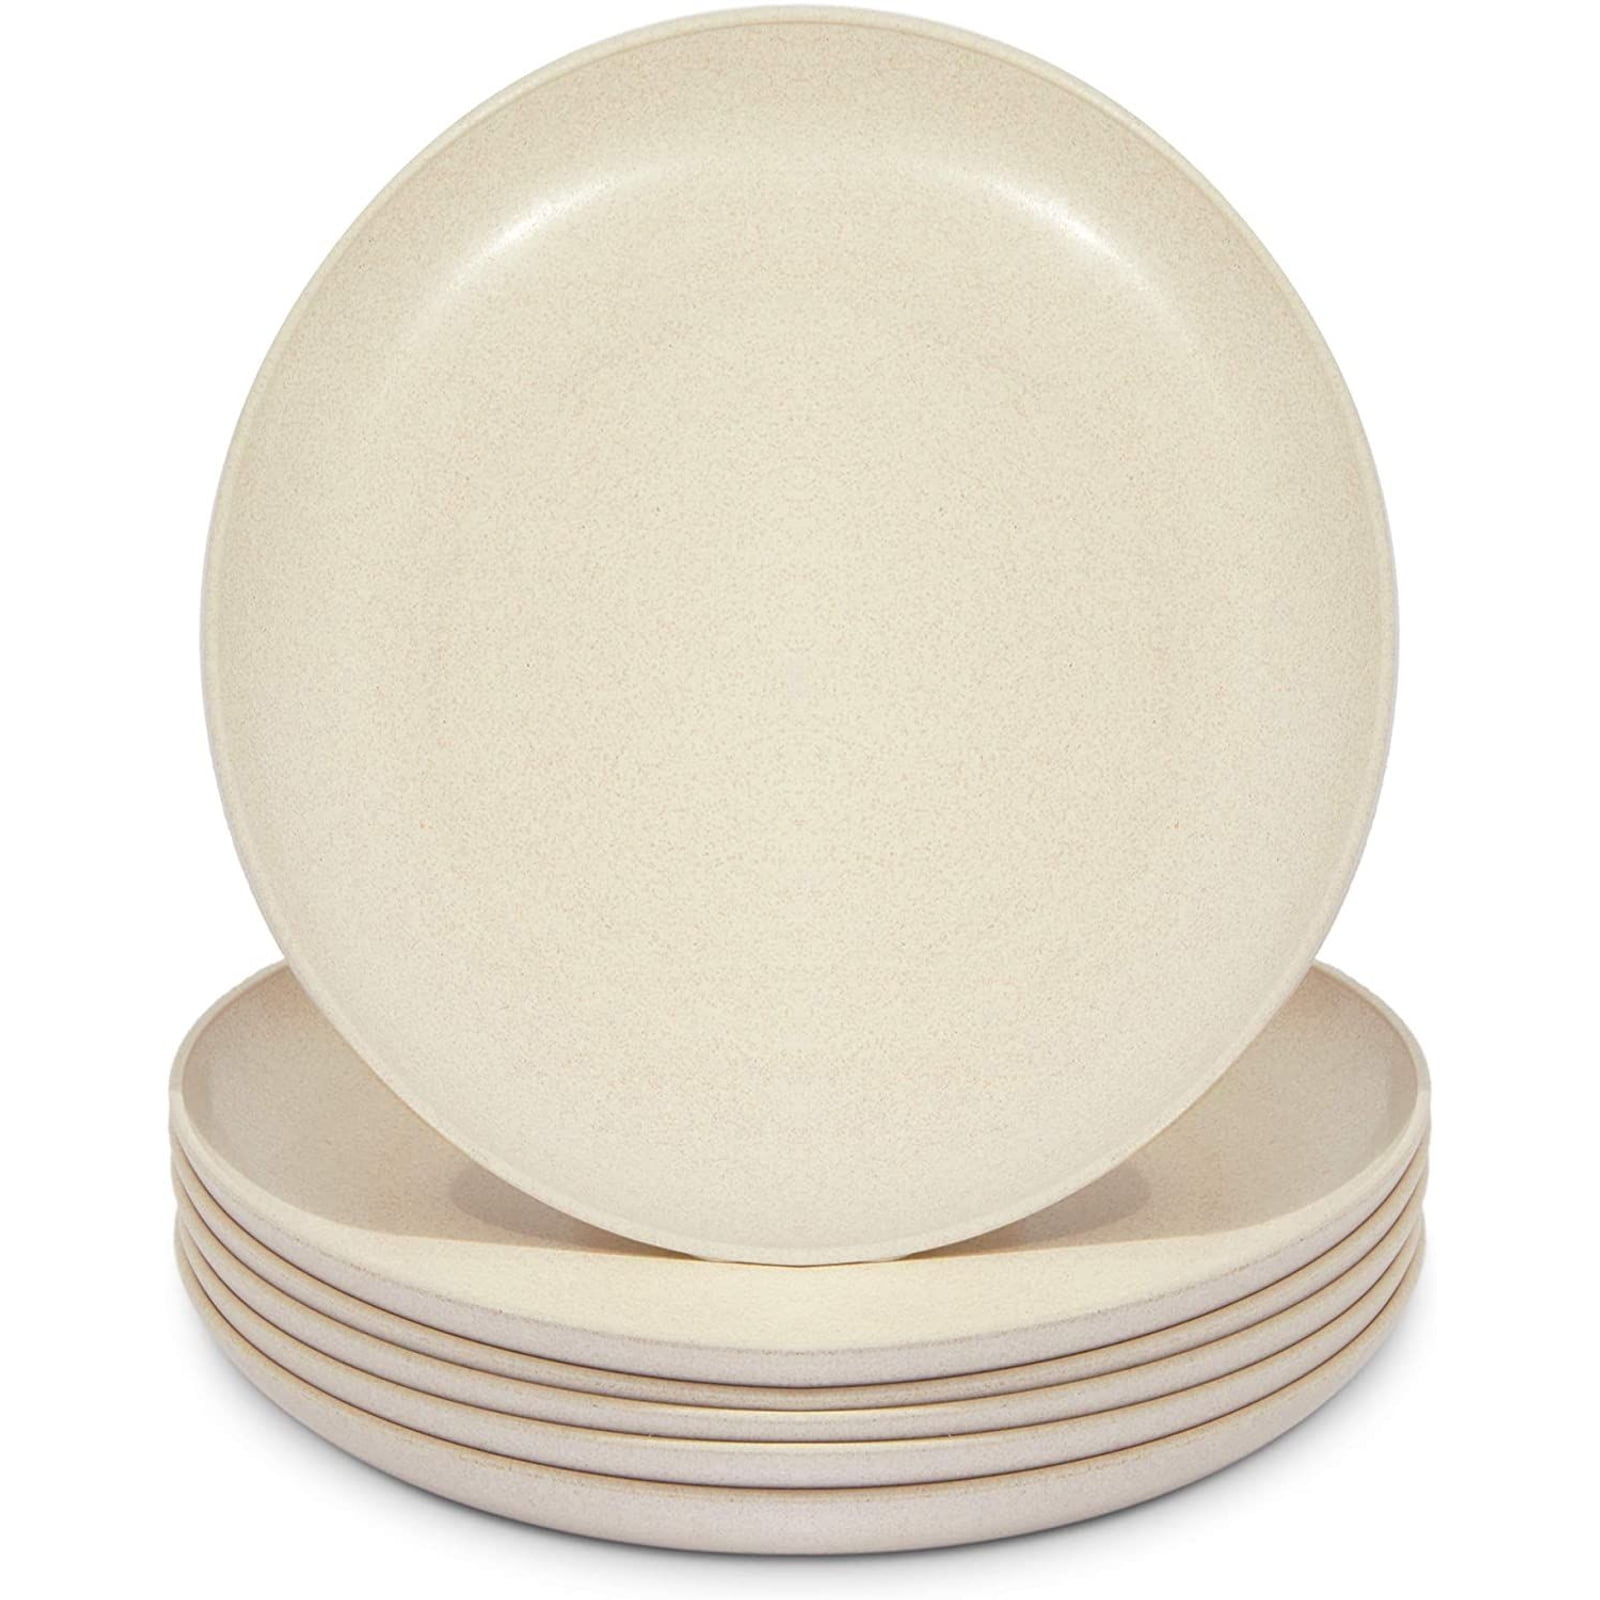 Small Serving Cake Dessert Set Details about   Goter 6 Inch Wheat Straw Appetizer Dinner Plates 